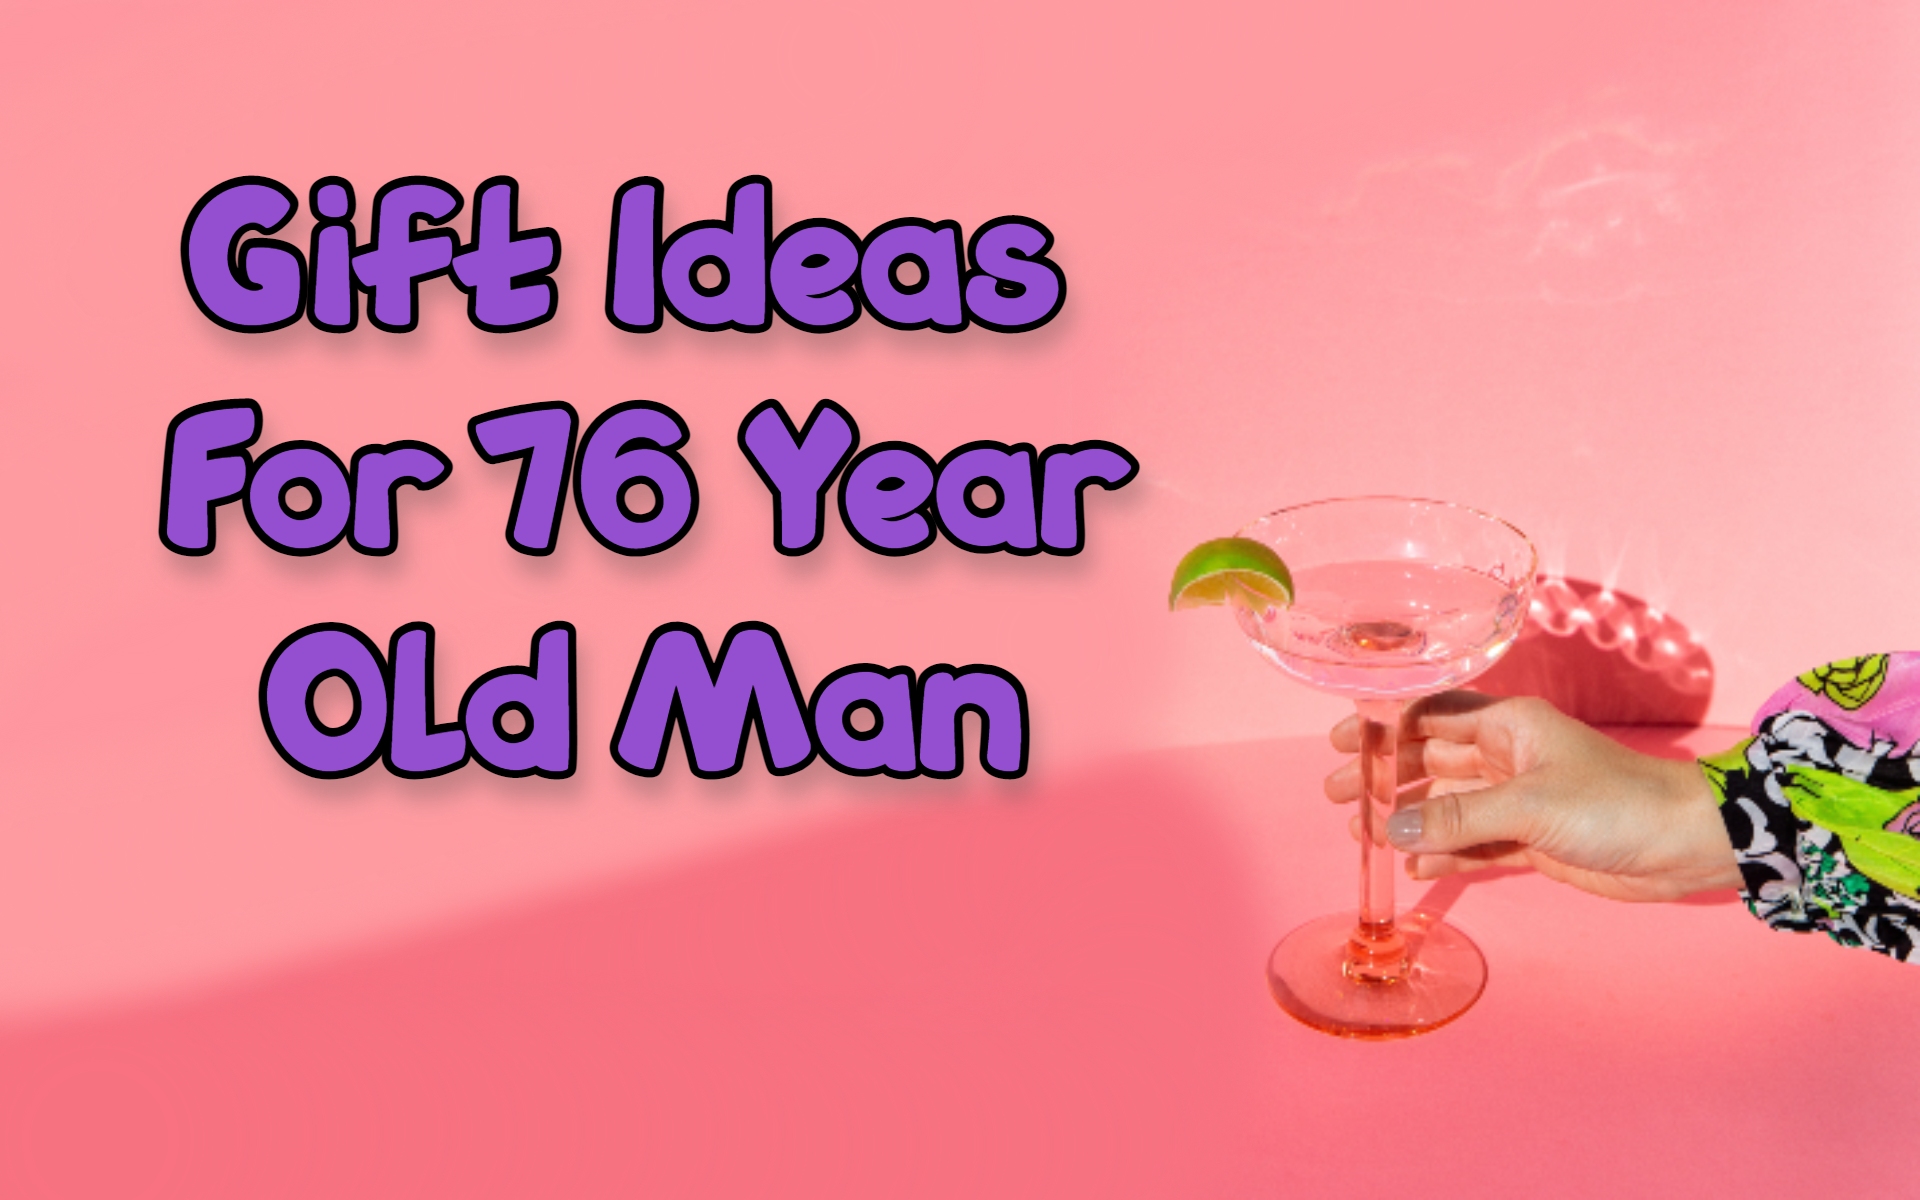 Cover image of gift ideas for 76-year-old man by Giftsedge